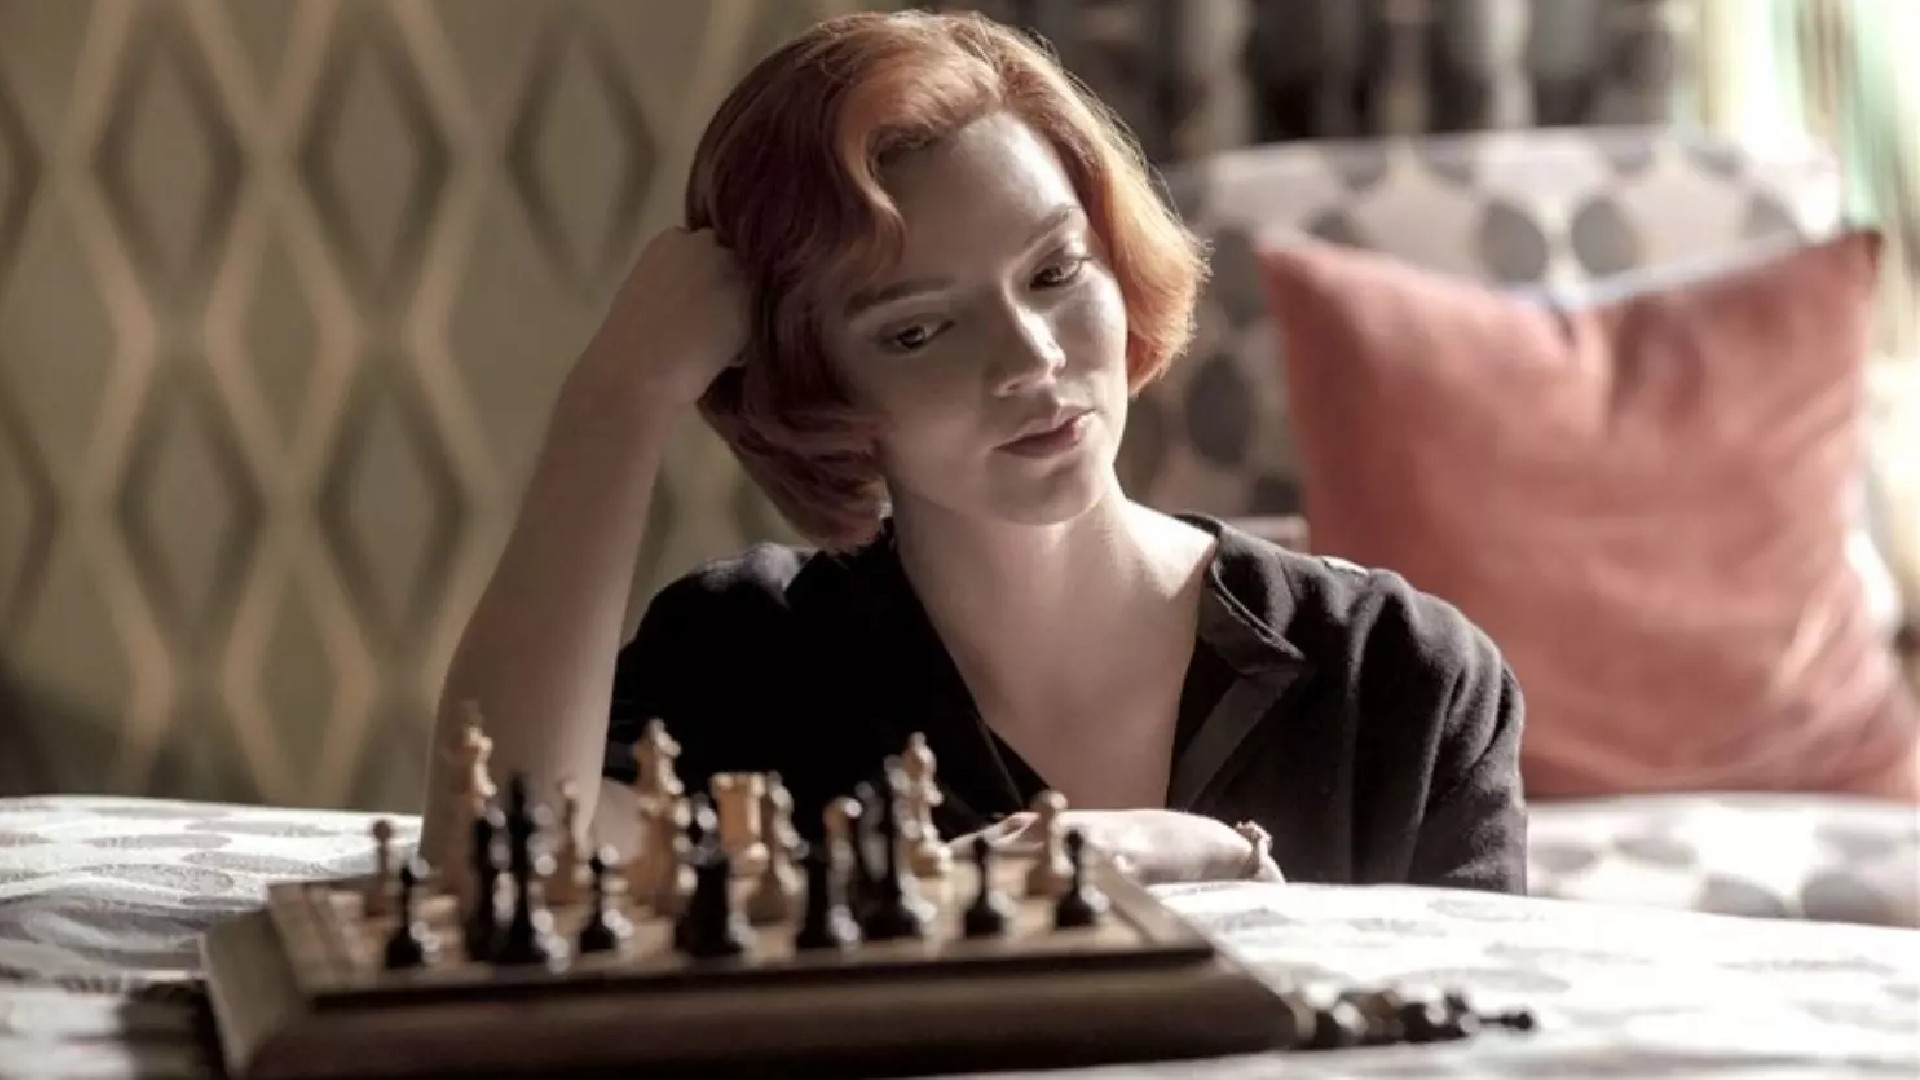 Show based on chess, ‘The Queen’s Gambit’ wins Emmy for Best Limited Series